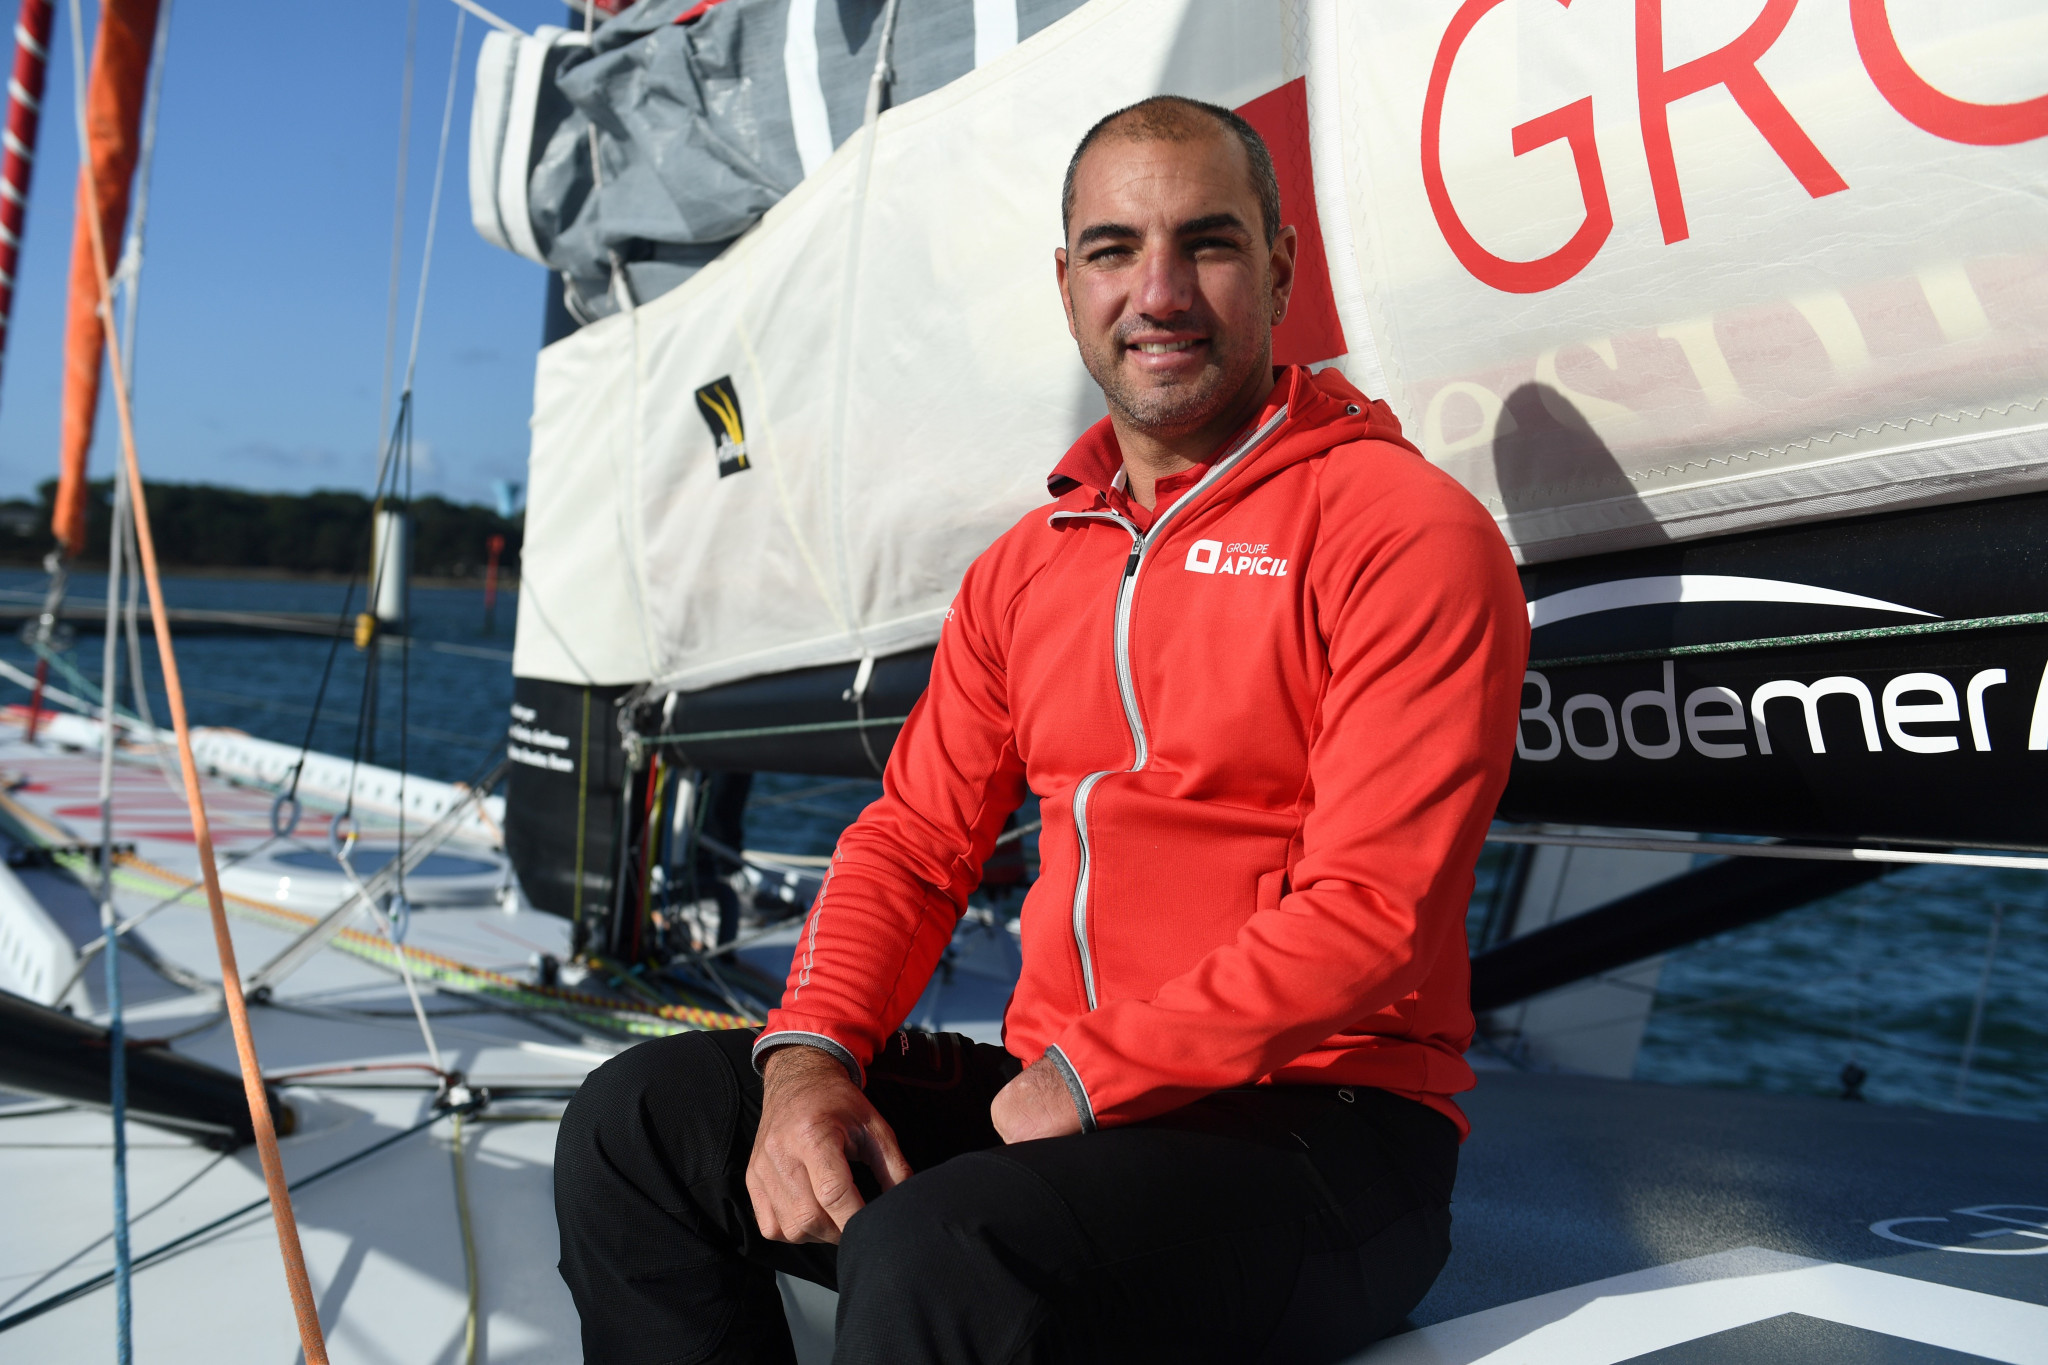 Three-time Paralympic medallist Damien Seguin is among 16 Para sailors in the 44-strong field in Brittany ©Getty Images